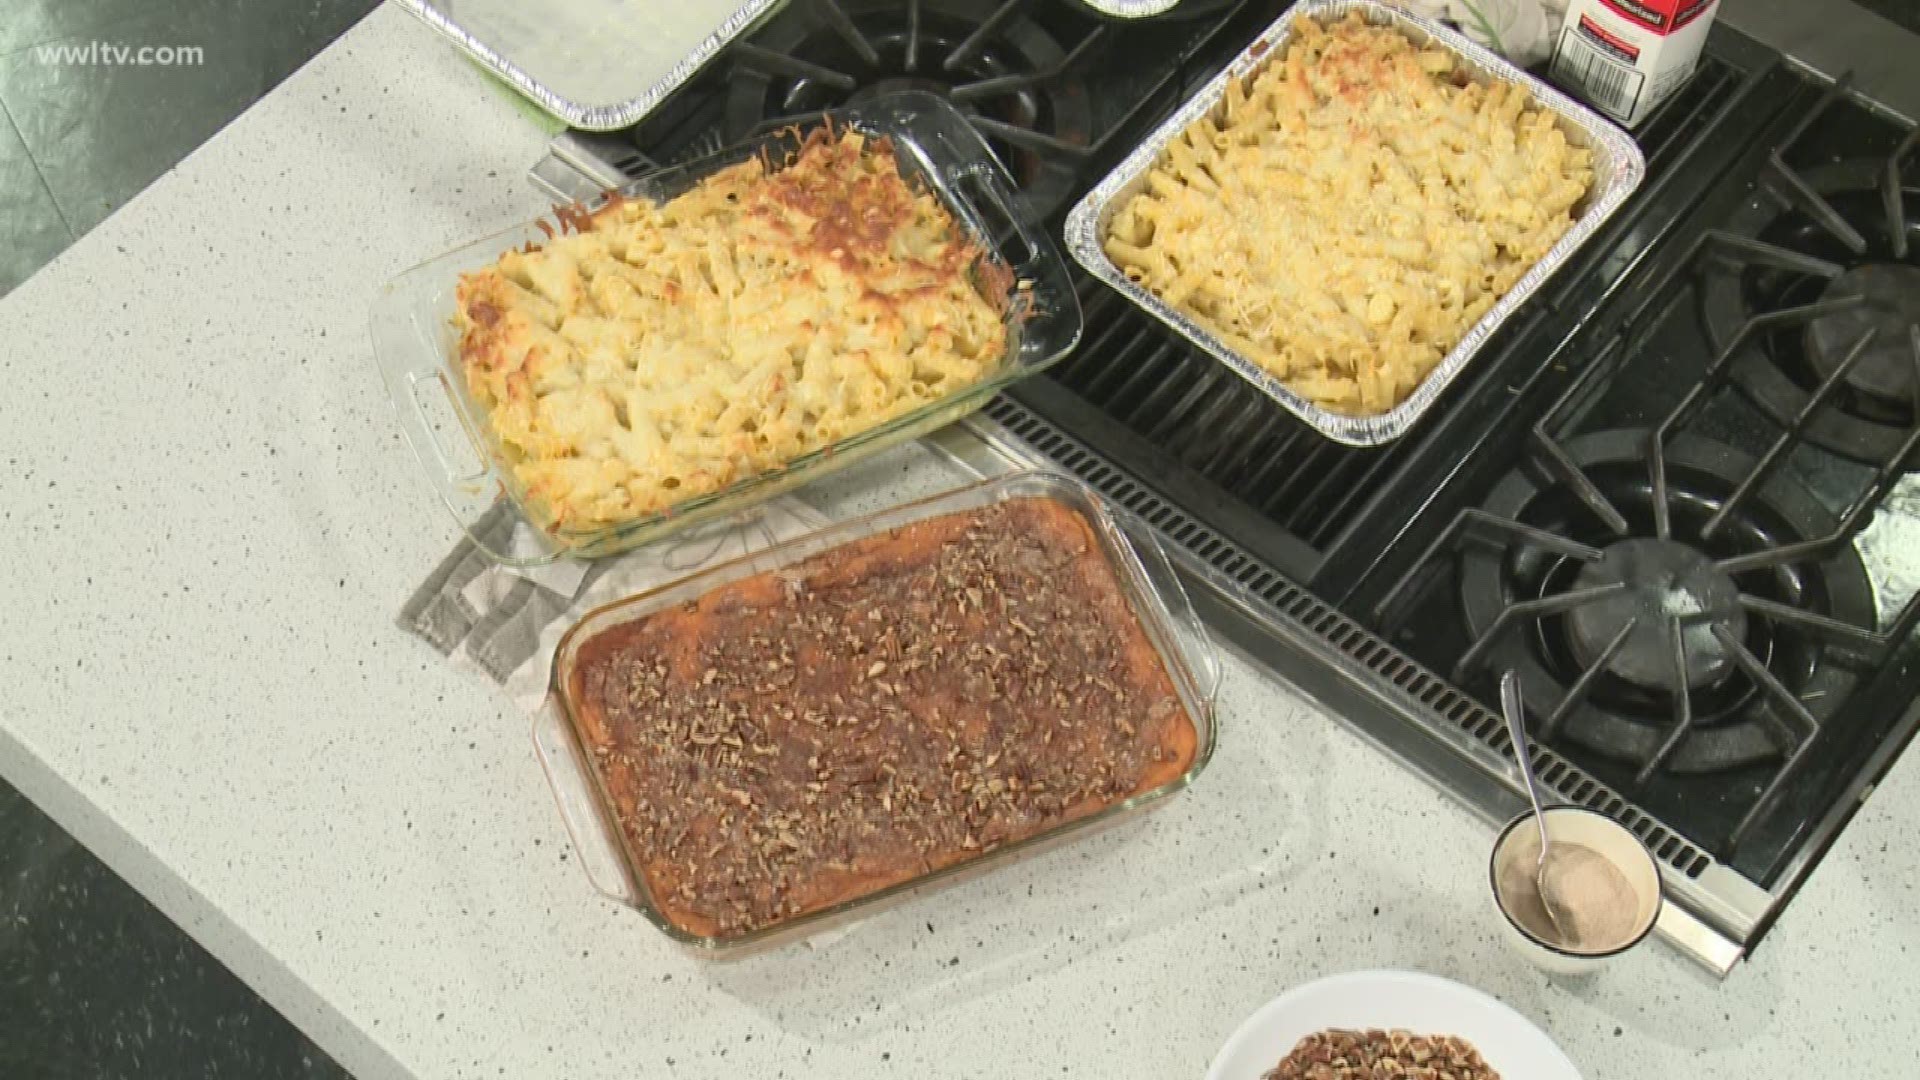 Chef Kevin is in the kitchen dazzling us with some Thanksgiving sides that can double as dessert.